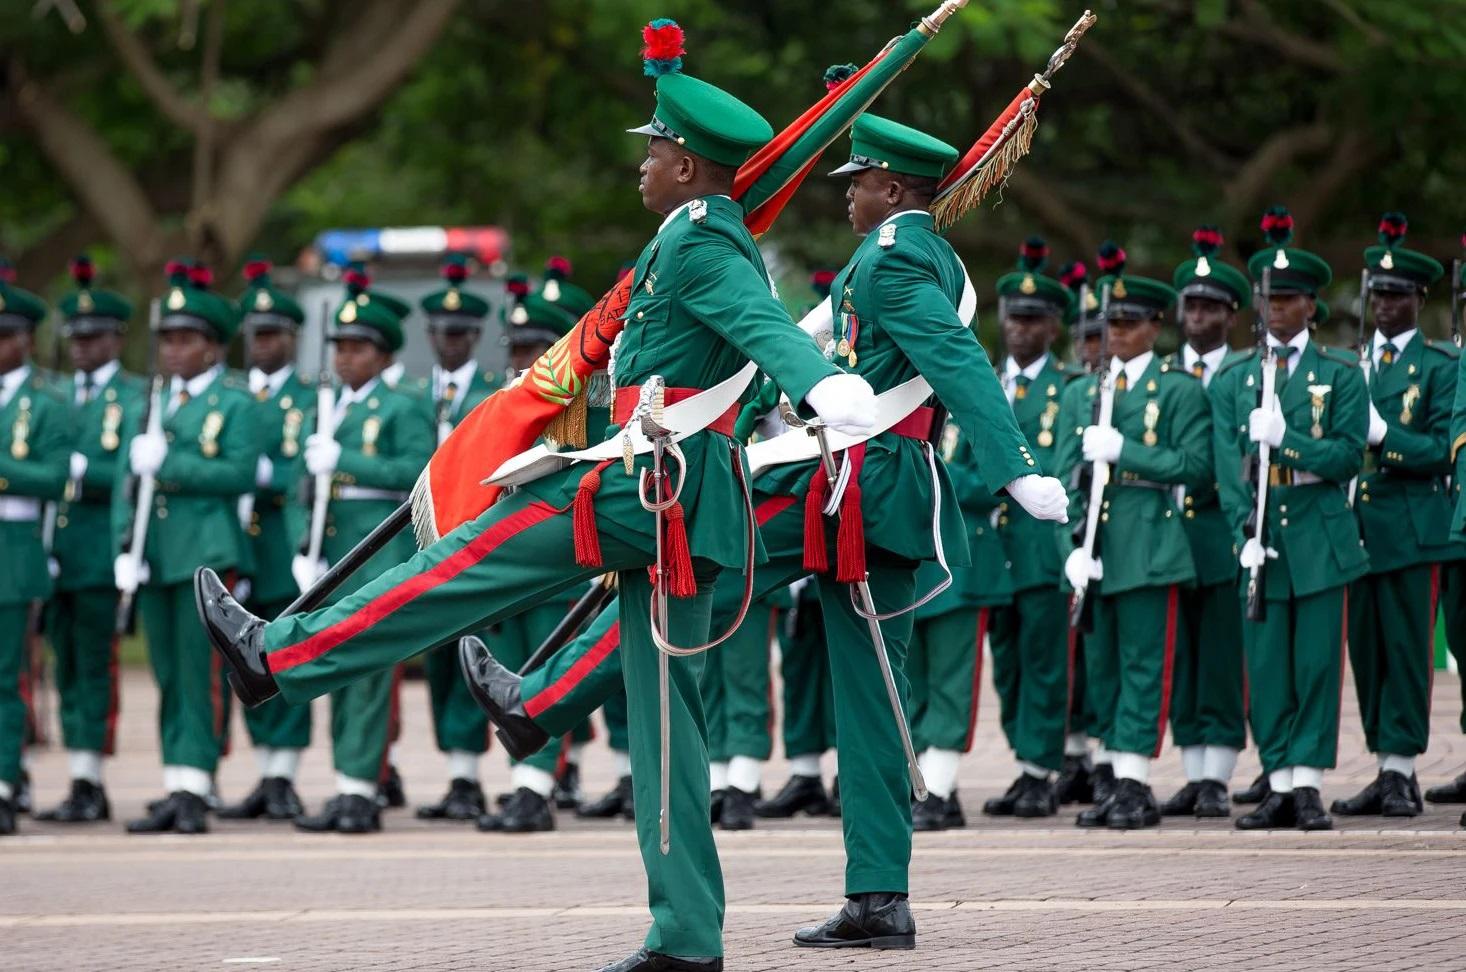 Nigeria’s Independence Day 2020 The history behind the October 1st